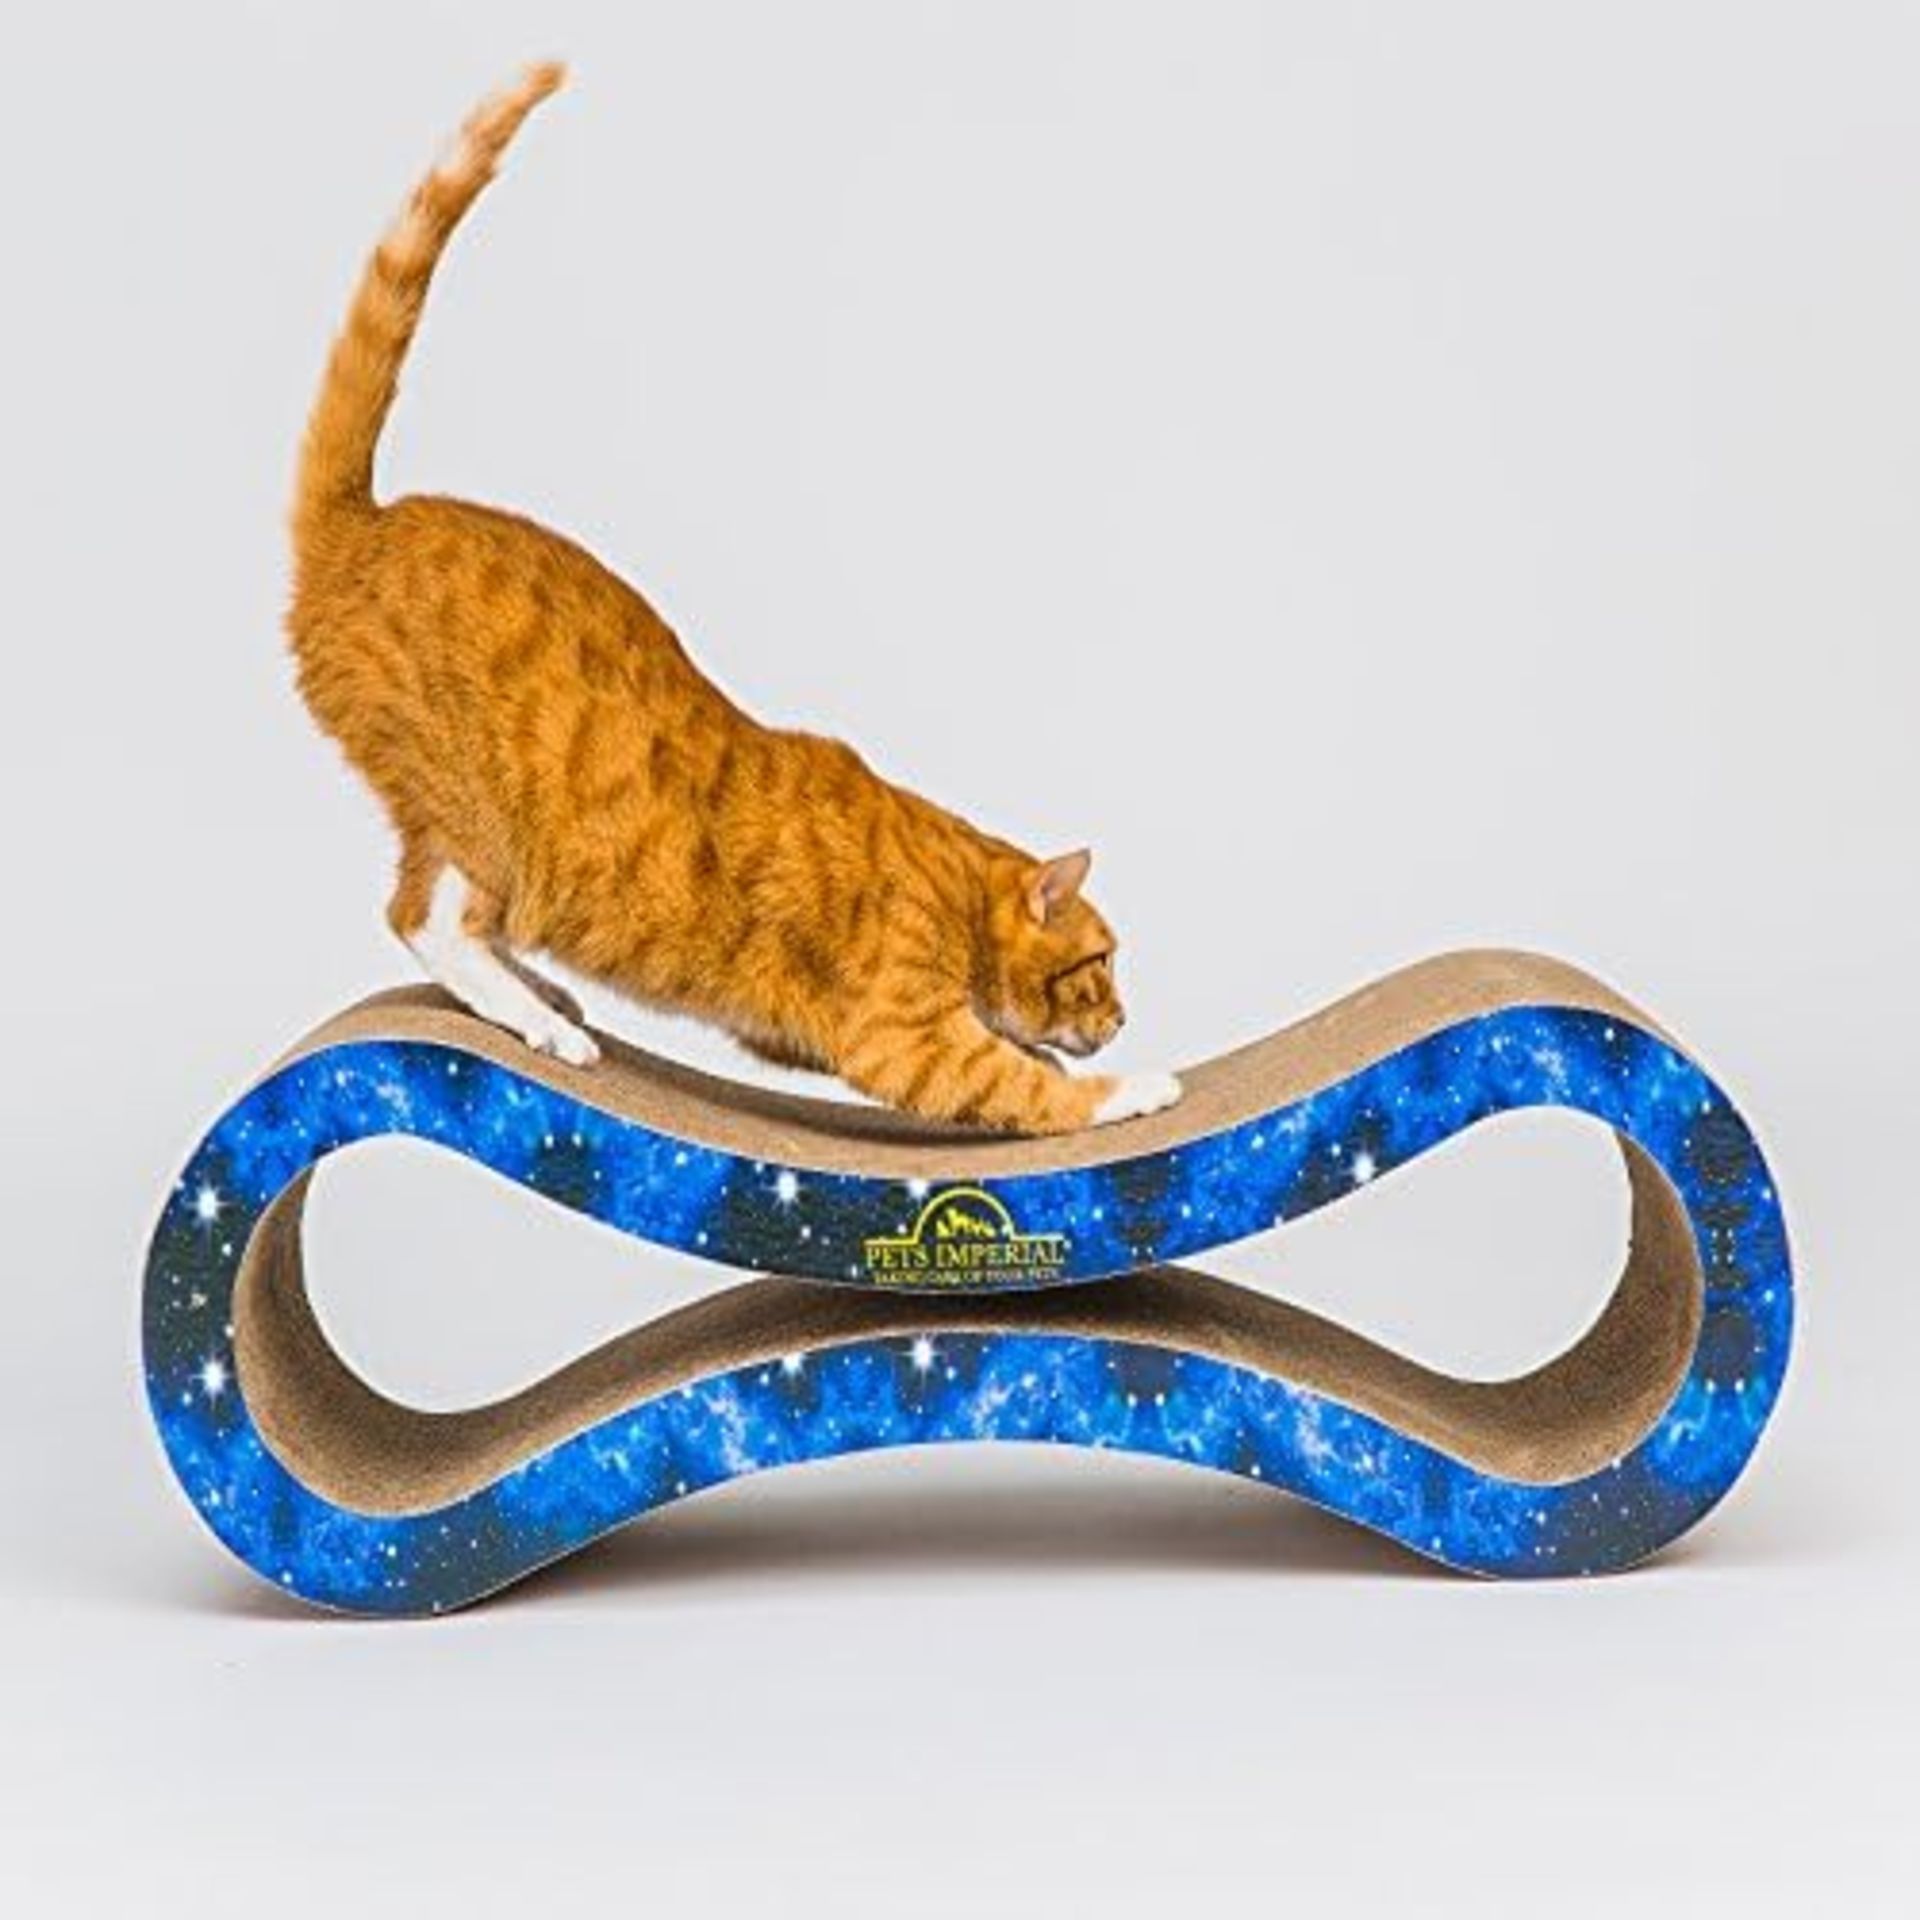 2x BRAND NEW PETS IMPERIAL EMPEROR CAT SCRATCHER LOUNGE WITH BLUE STARRY COLOR PAPER. (S1RA) - Image 3 of 3